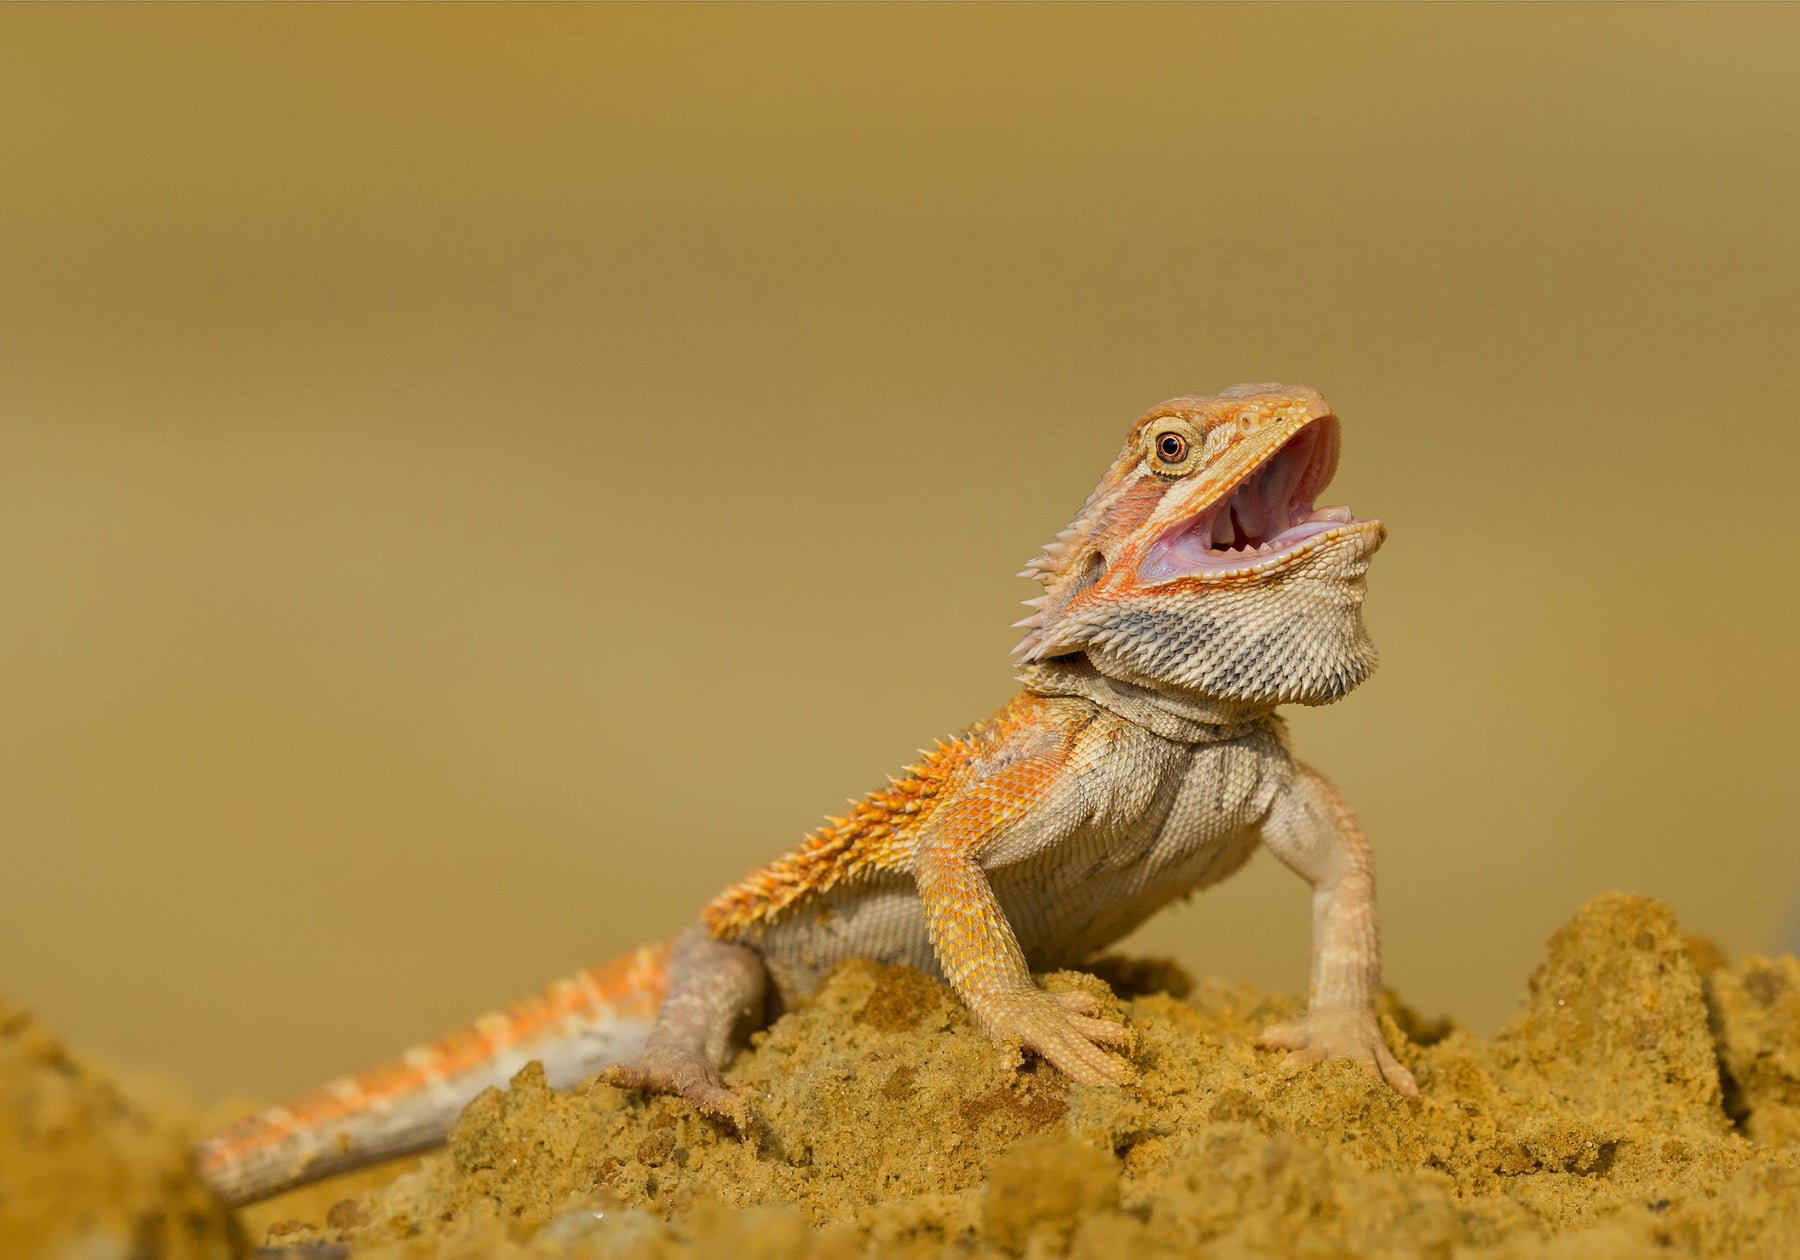 Can Bearded Dragon Eat Raw Meat?